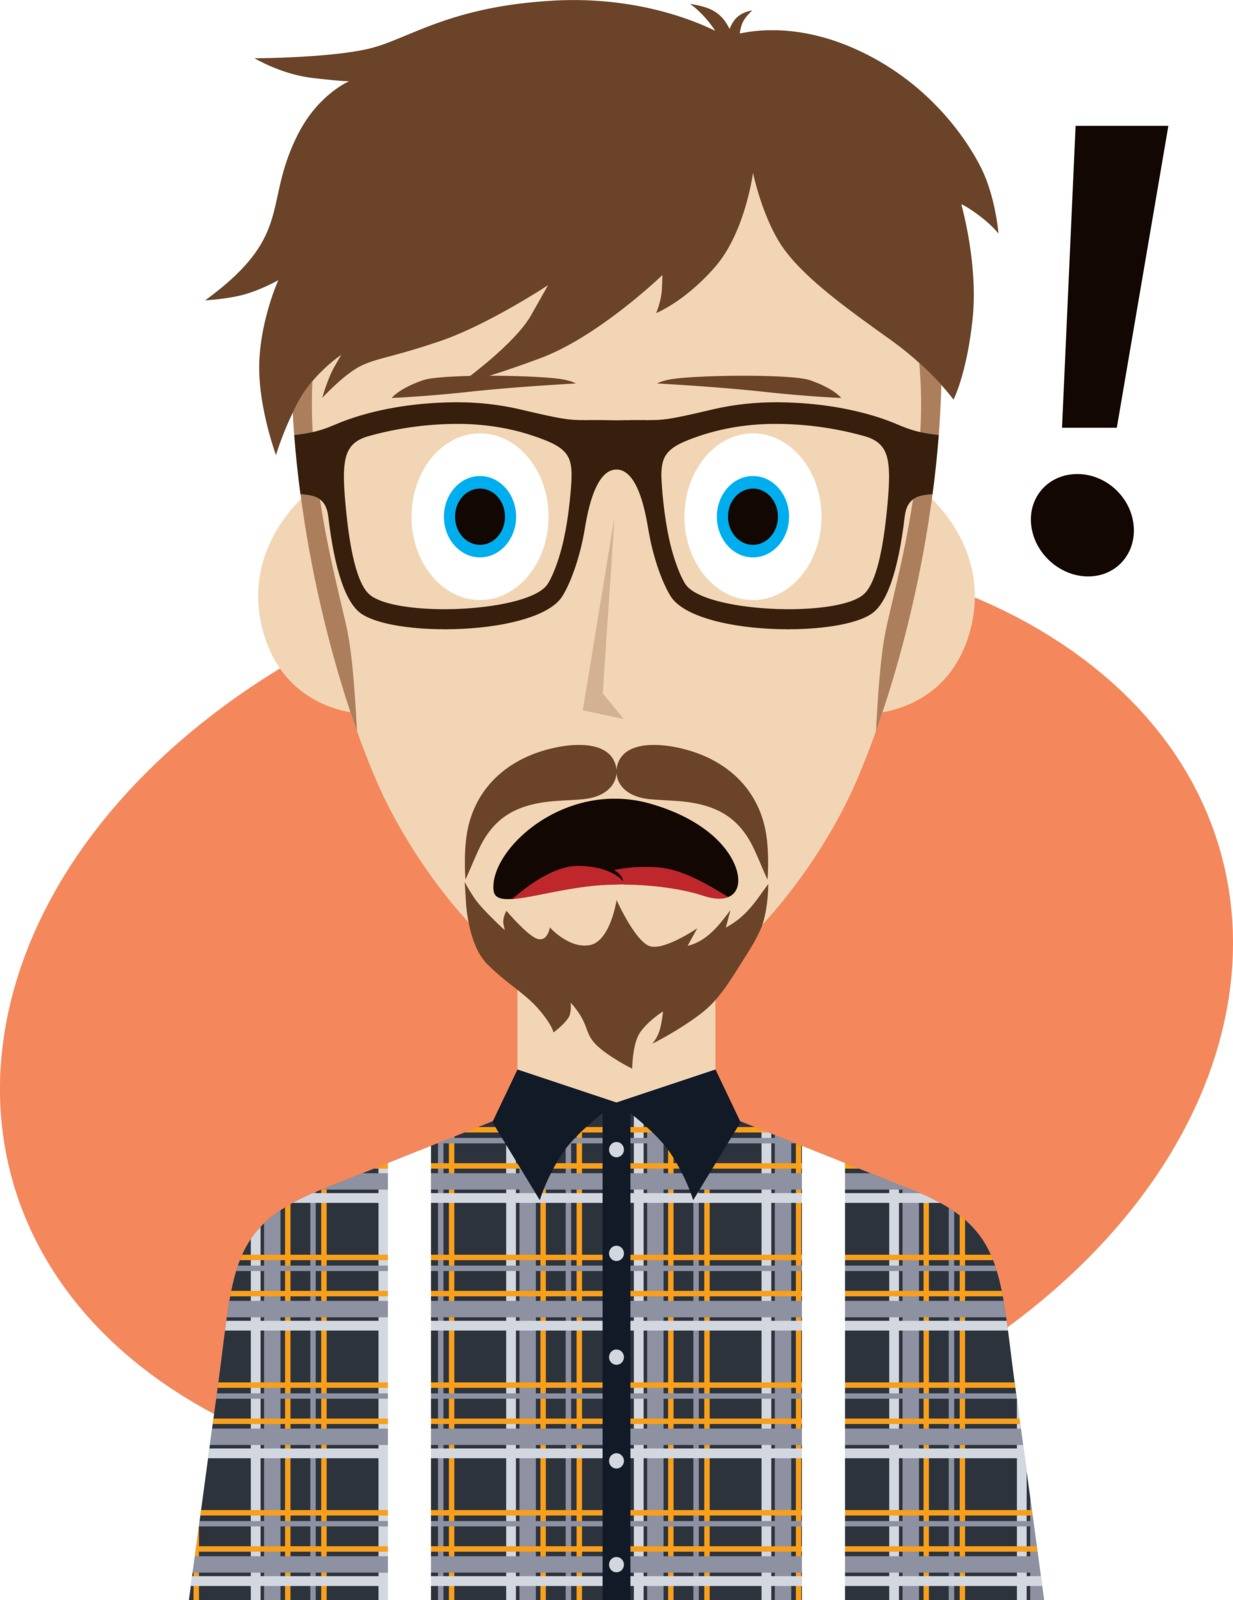 guy surprise avatar user picture cartoon character vector illustration